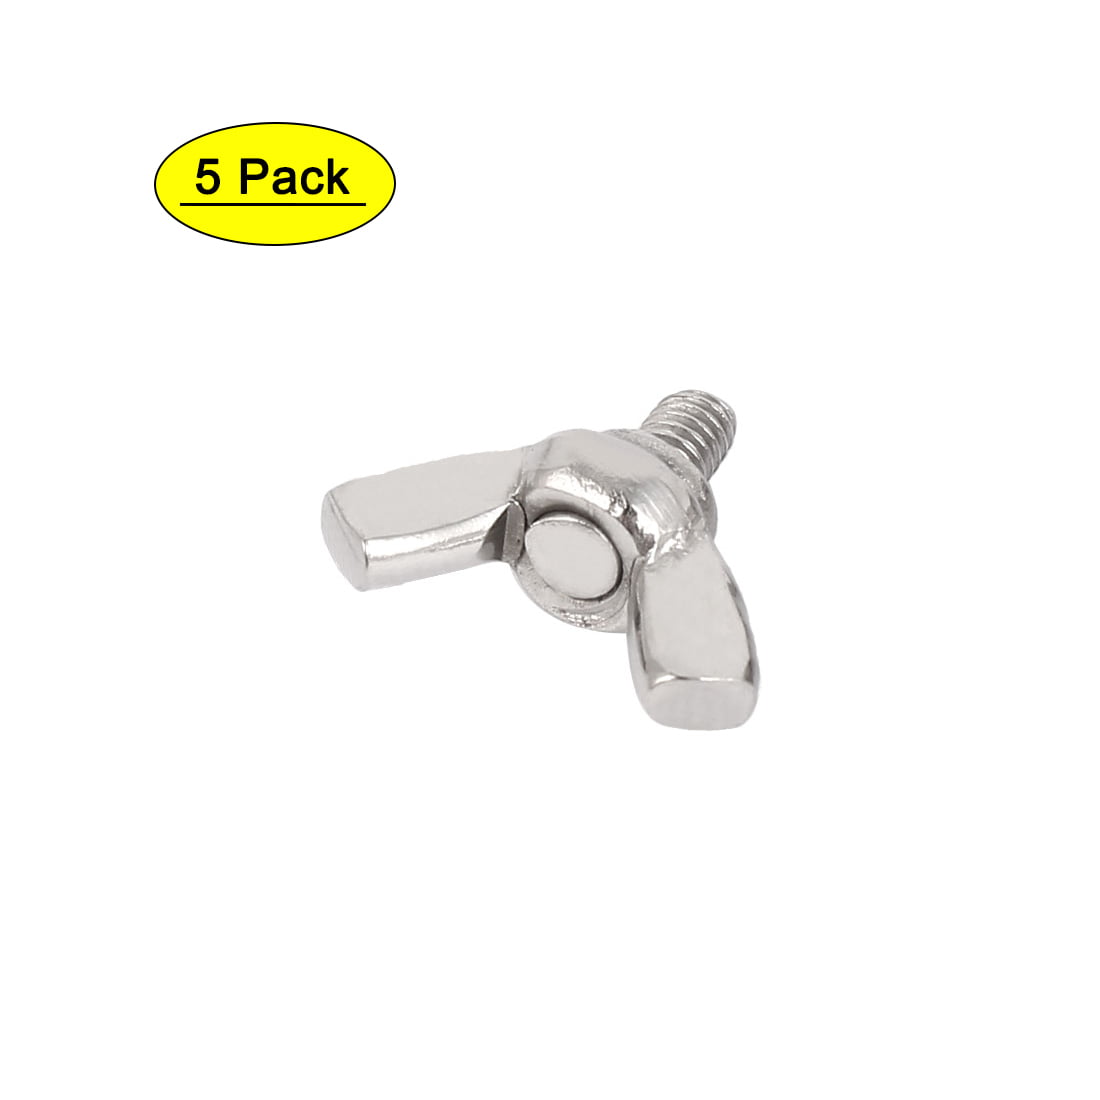 Stainless Steel Metric Wing Nut M5 x 0.8 A2 5 Pack 